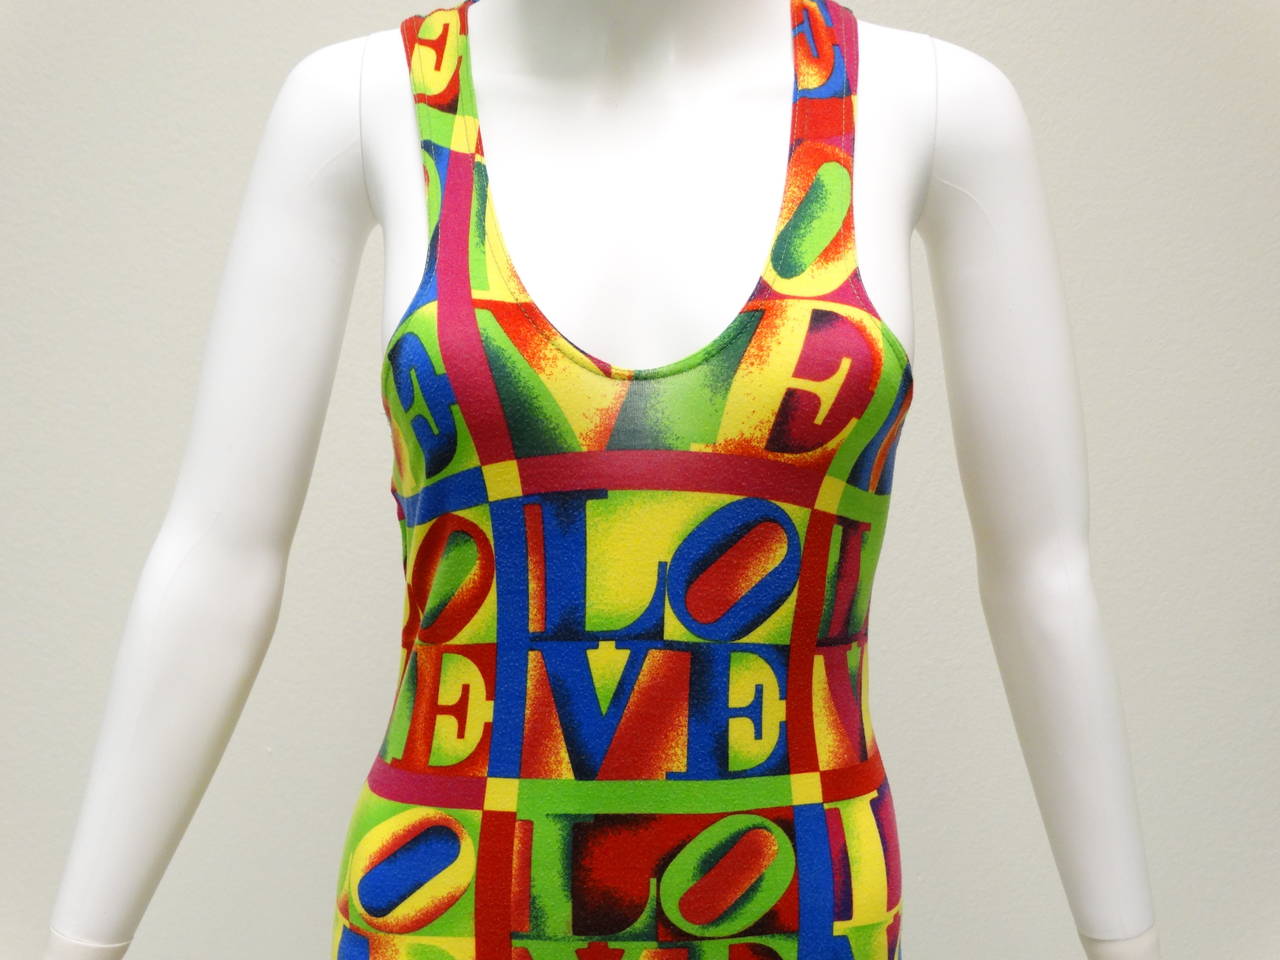 This iconic dress is vintage Versace jeans couture sleeveless racer back 